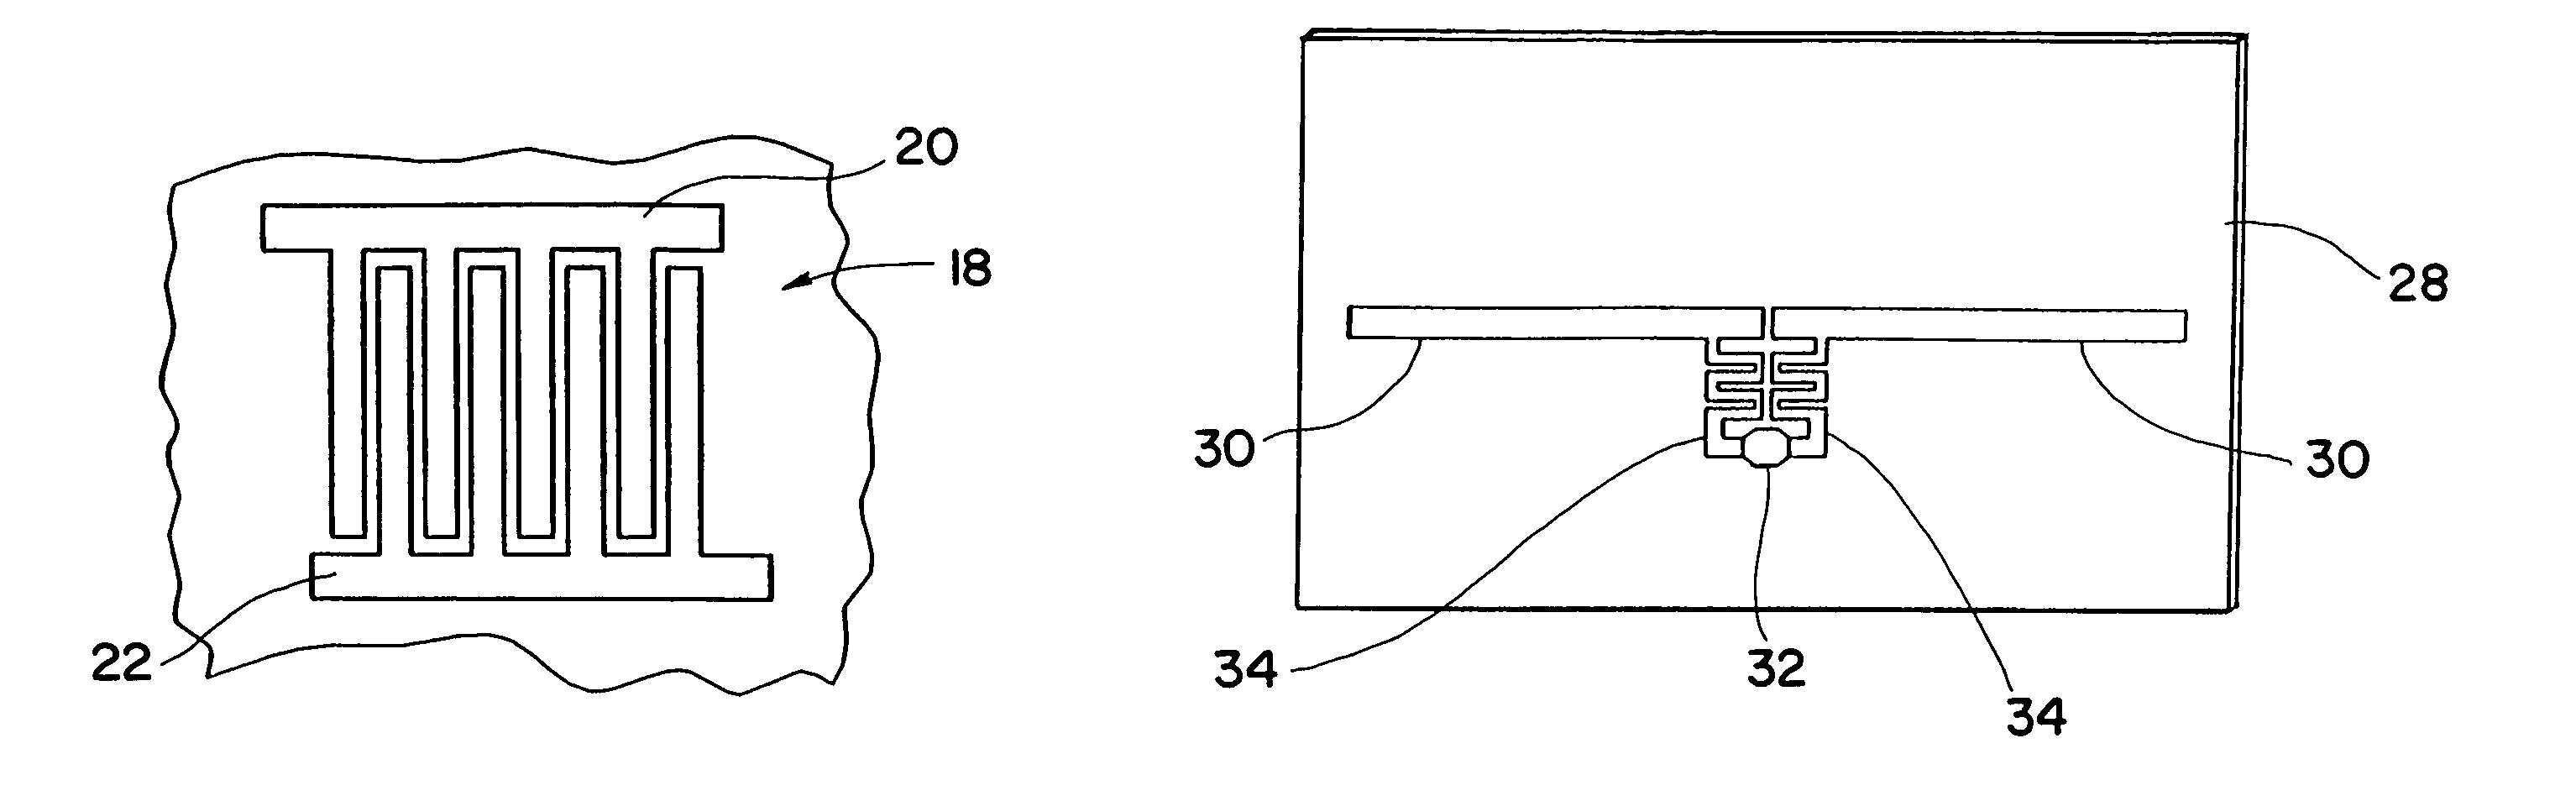 Self-compensating antennas for substrates having differing dielectric constant values